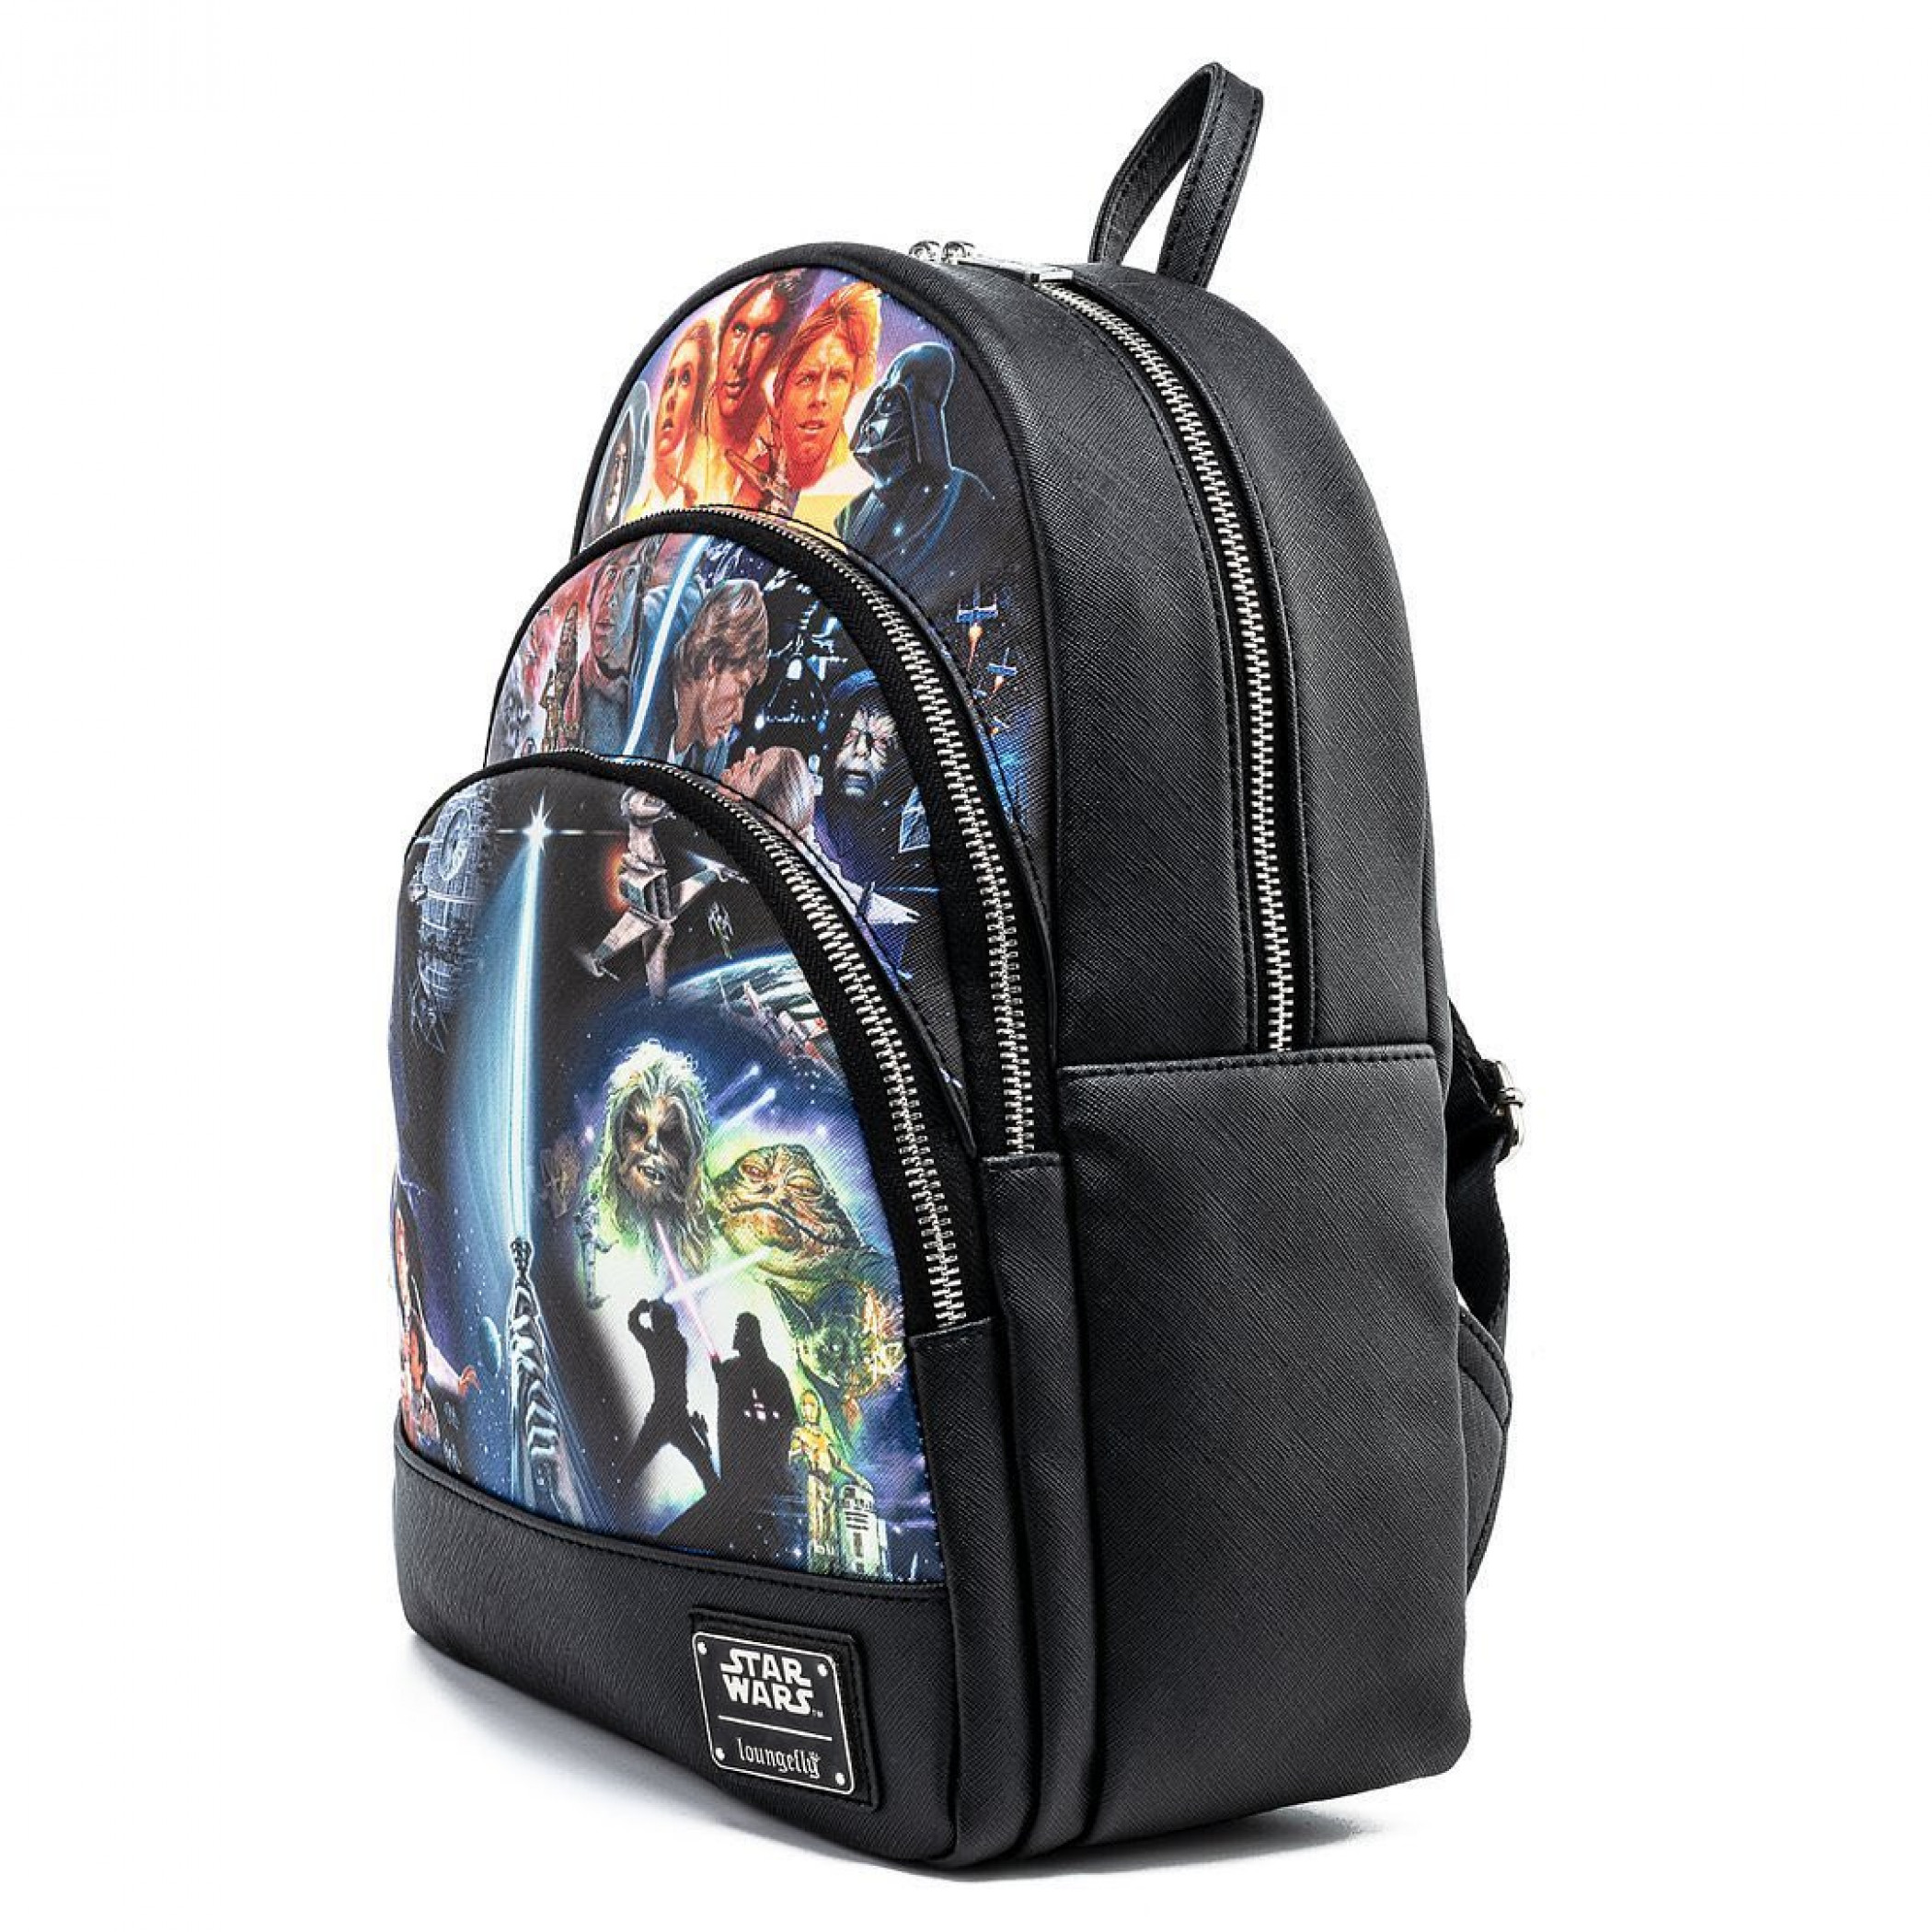 Star Wars Original Trilogy Mini Backpack by Loungefly